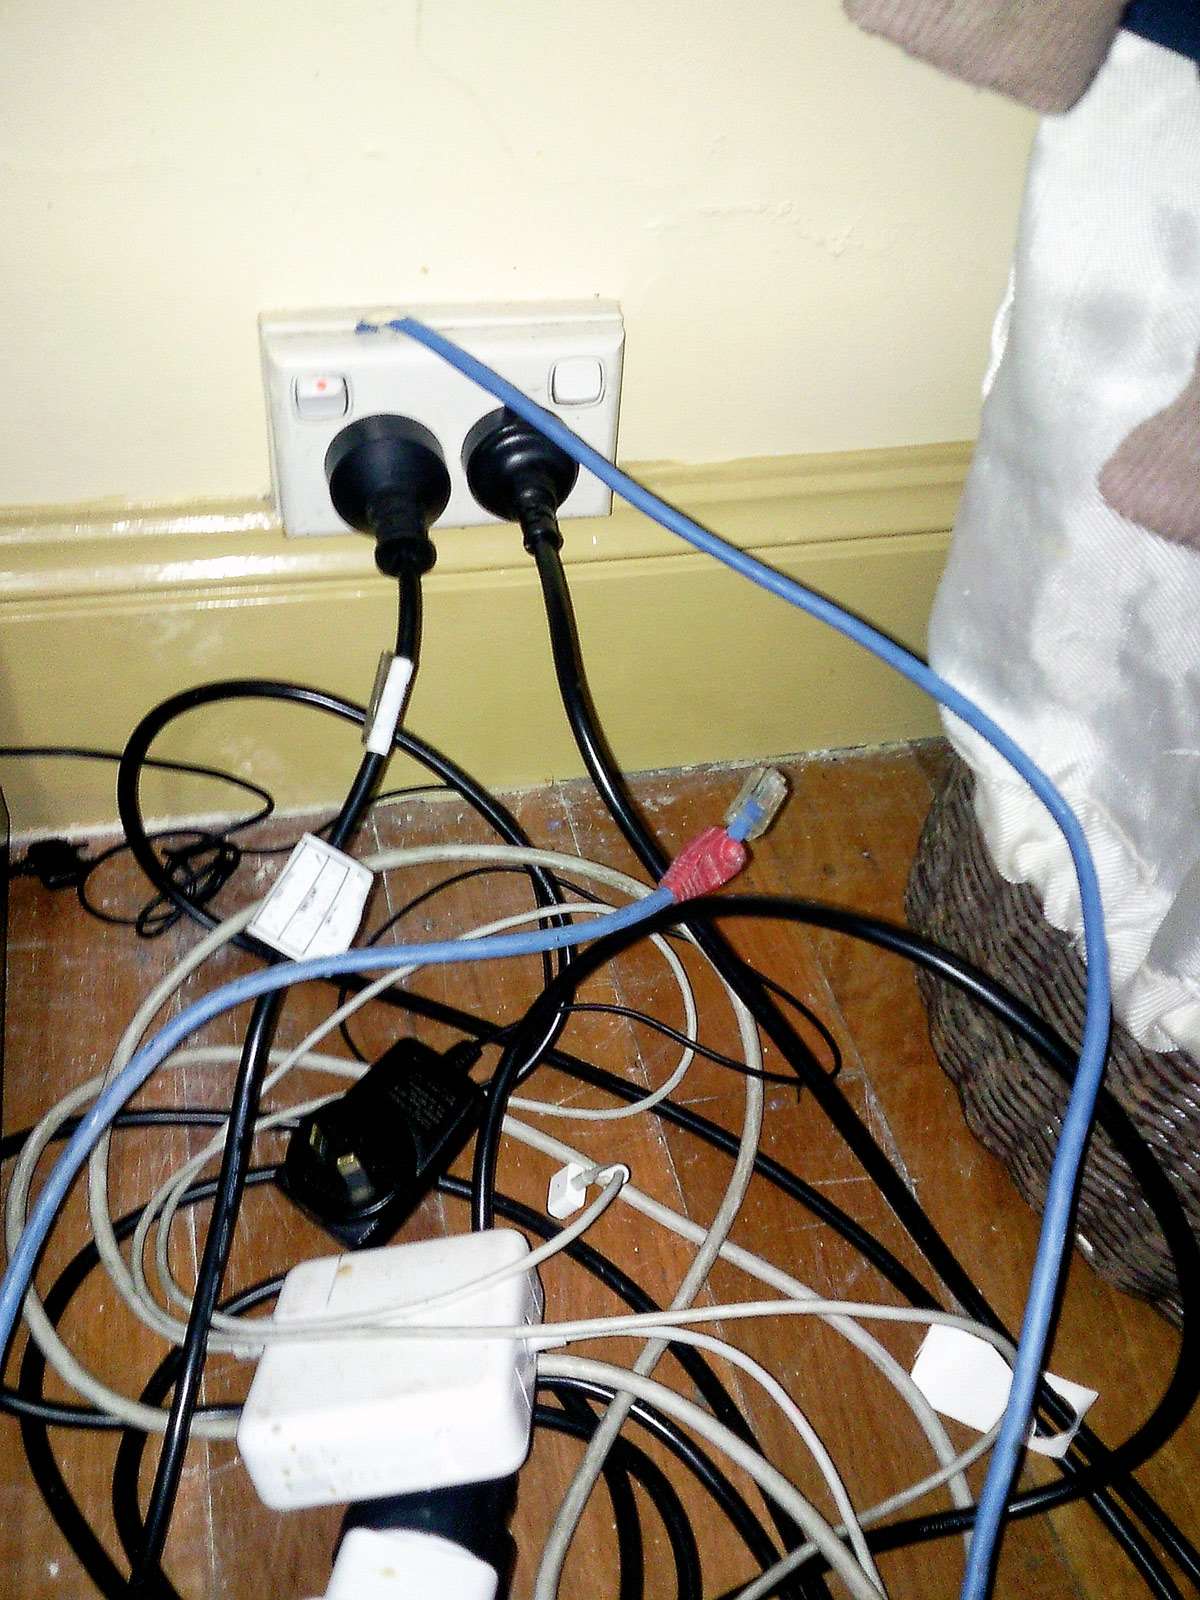 In pictures: Common network wiring mistakes - Collaboration